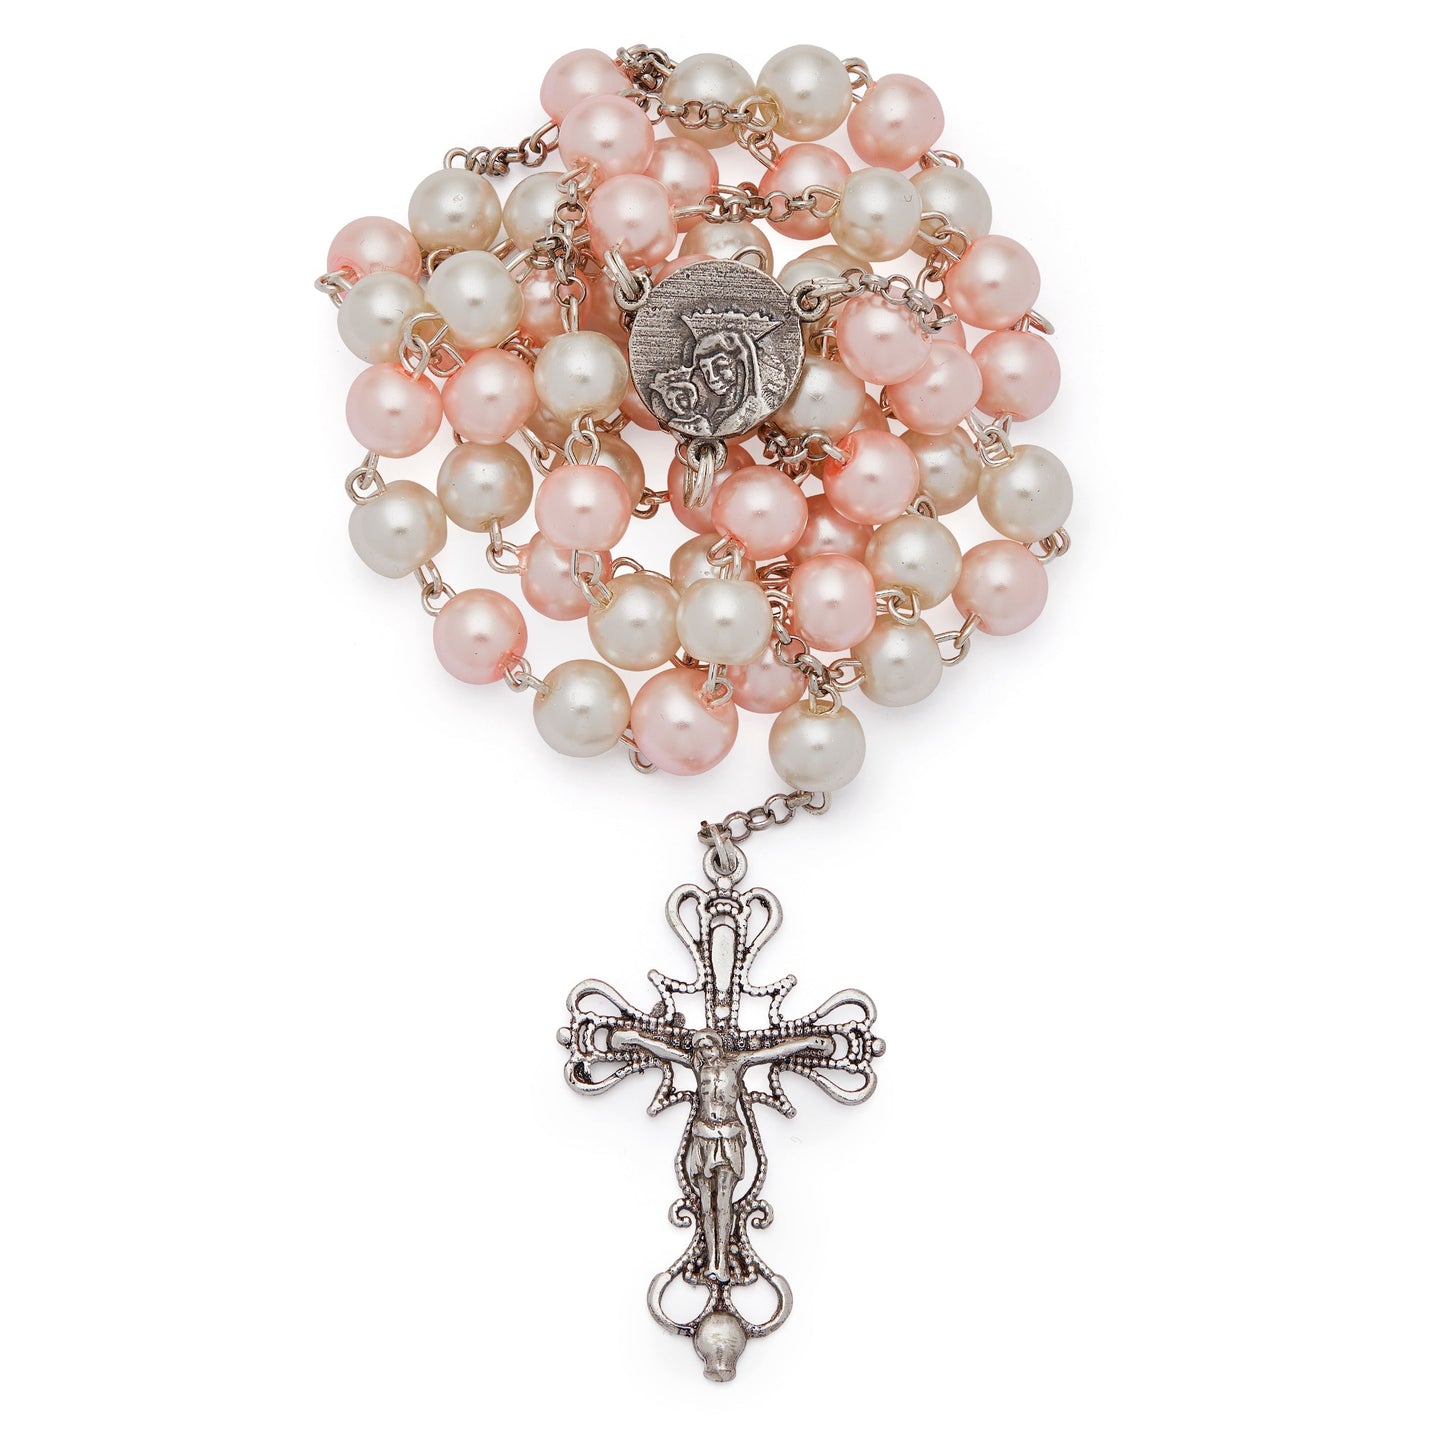 MONDO CATTOLICO Prayer Beads Sterling Silver Rosary Swarovski Crystal Pearls White and Pink Beads